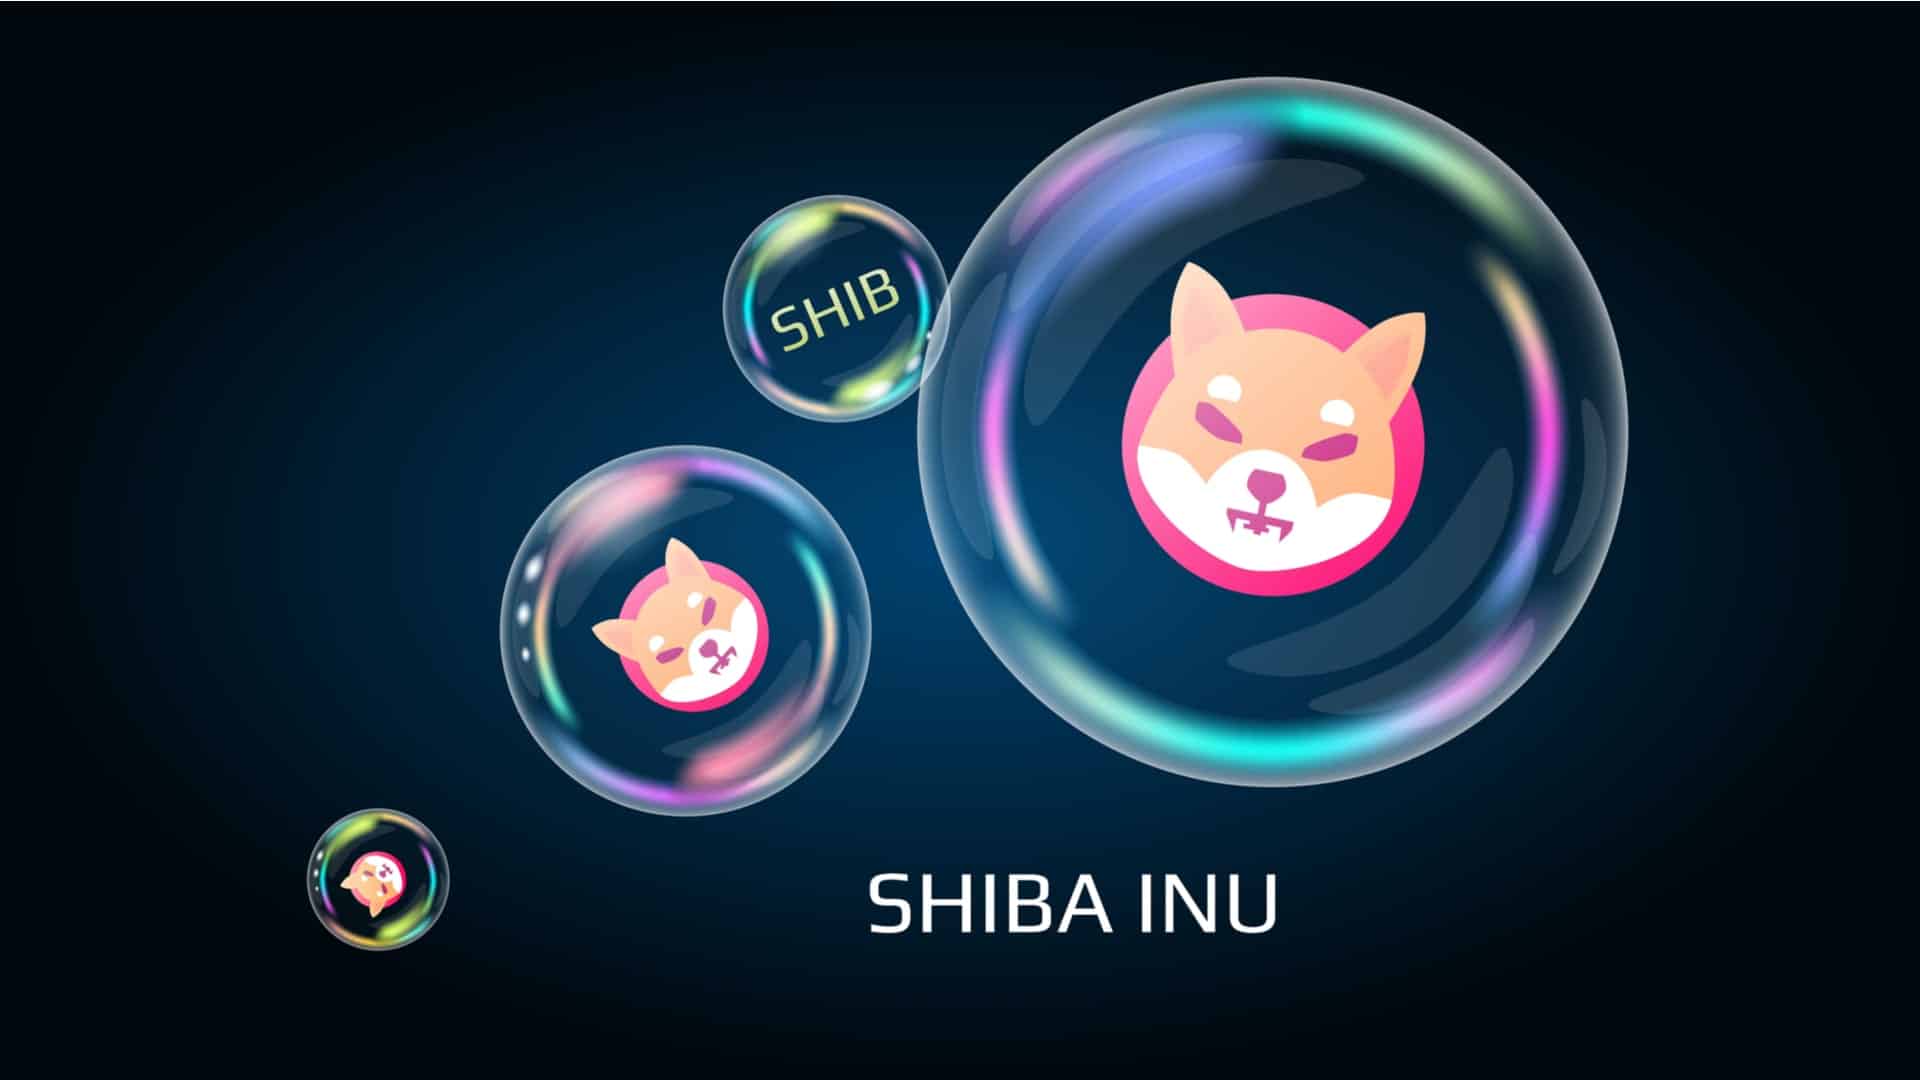 In one Paris restaurant will be possible to pay with Shiba Inu